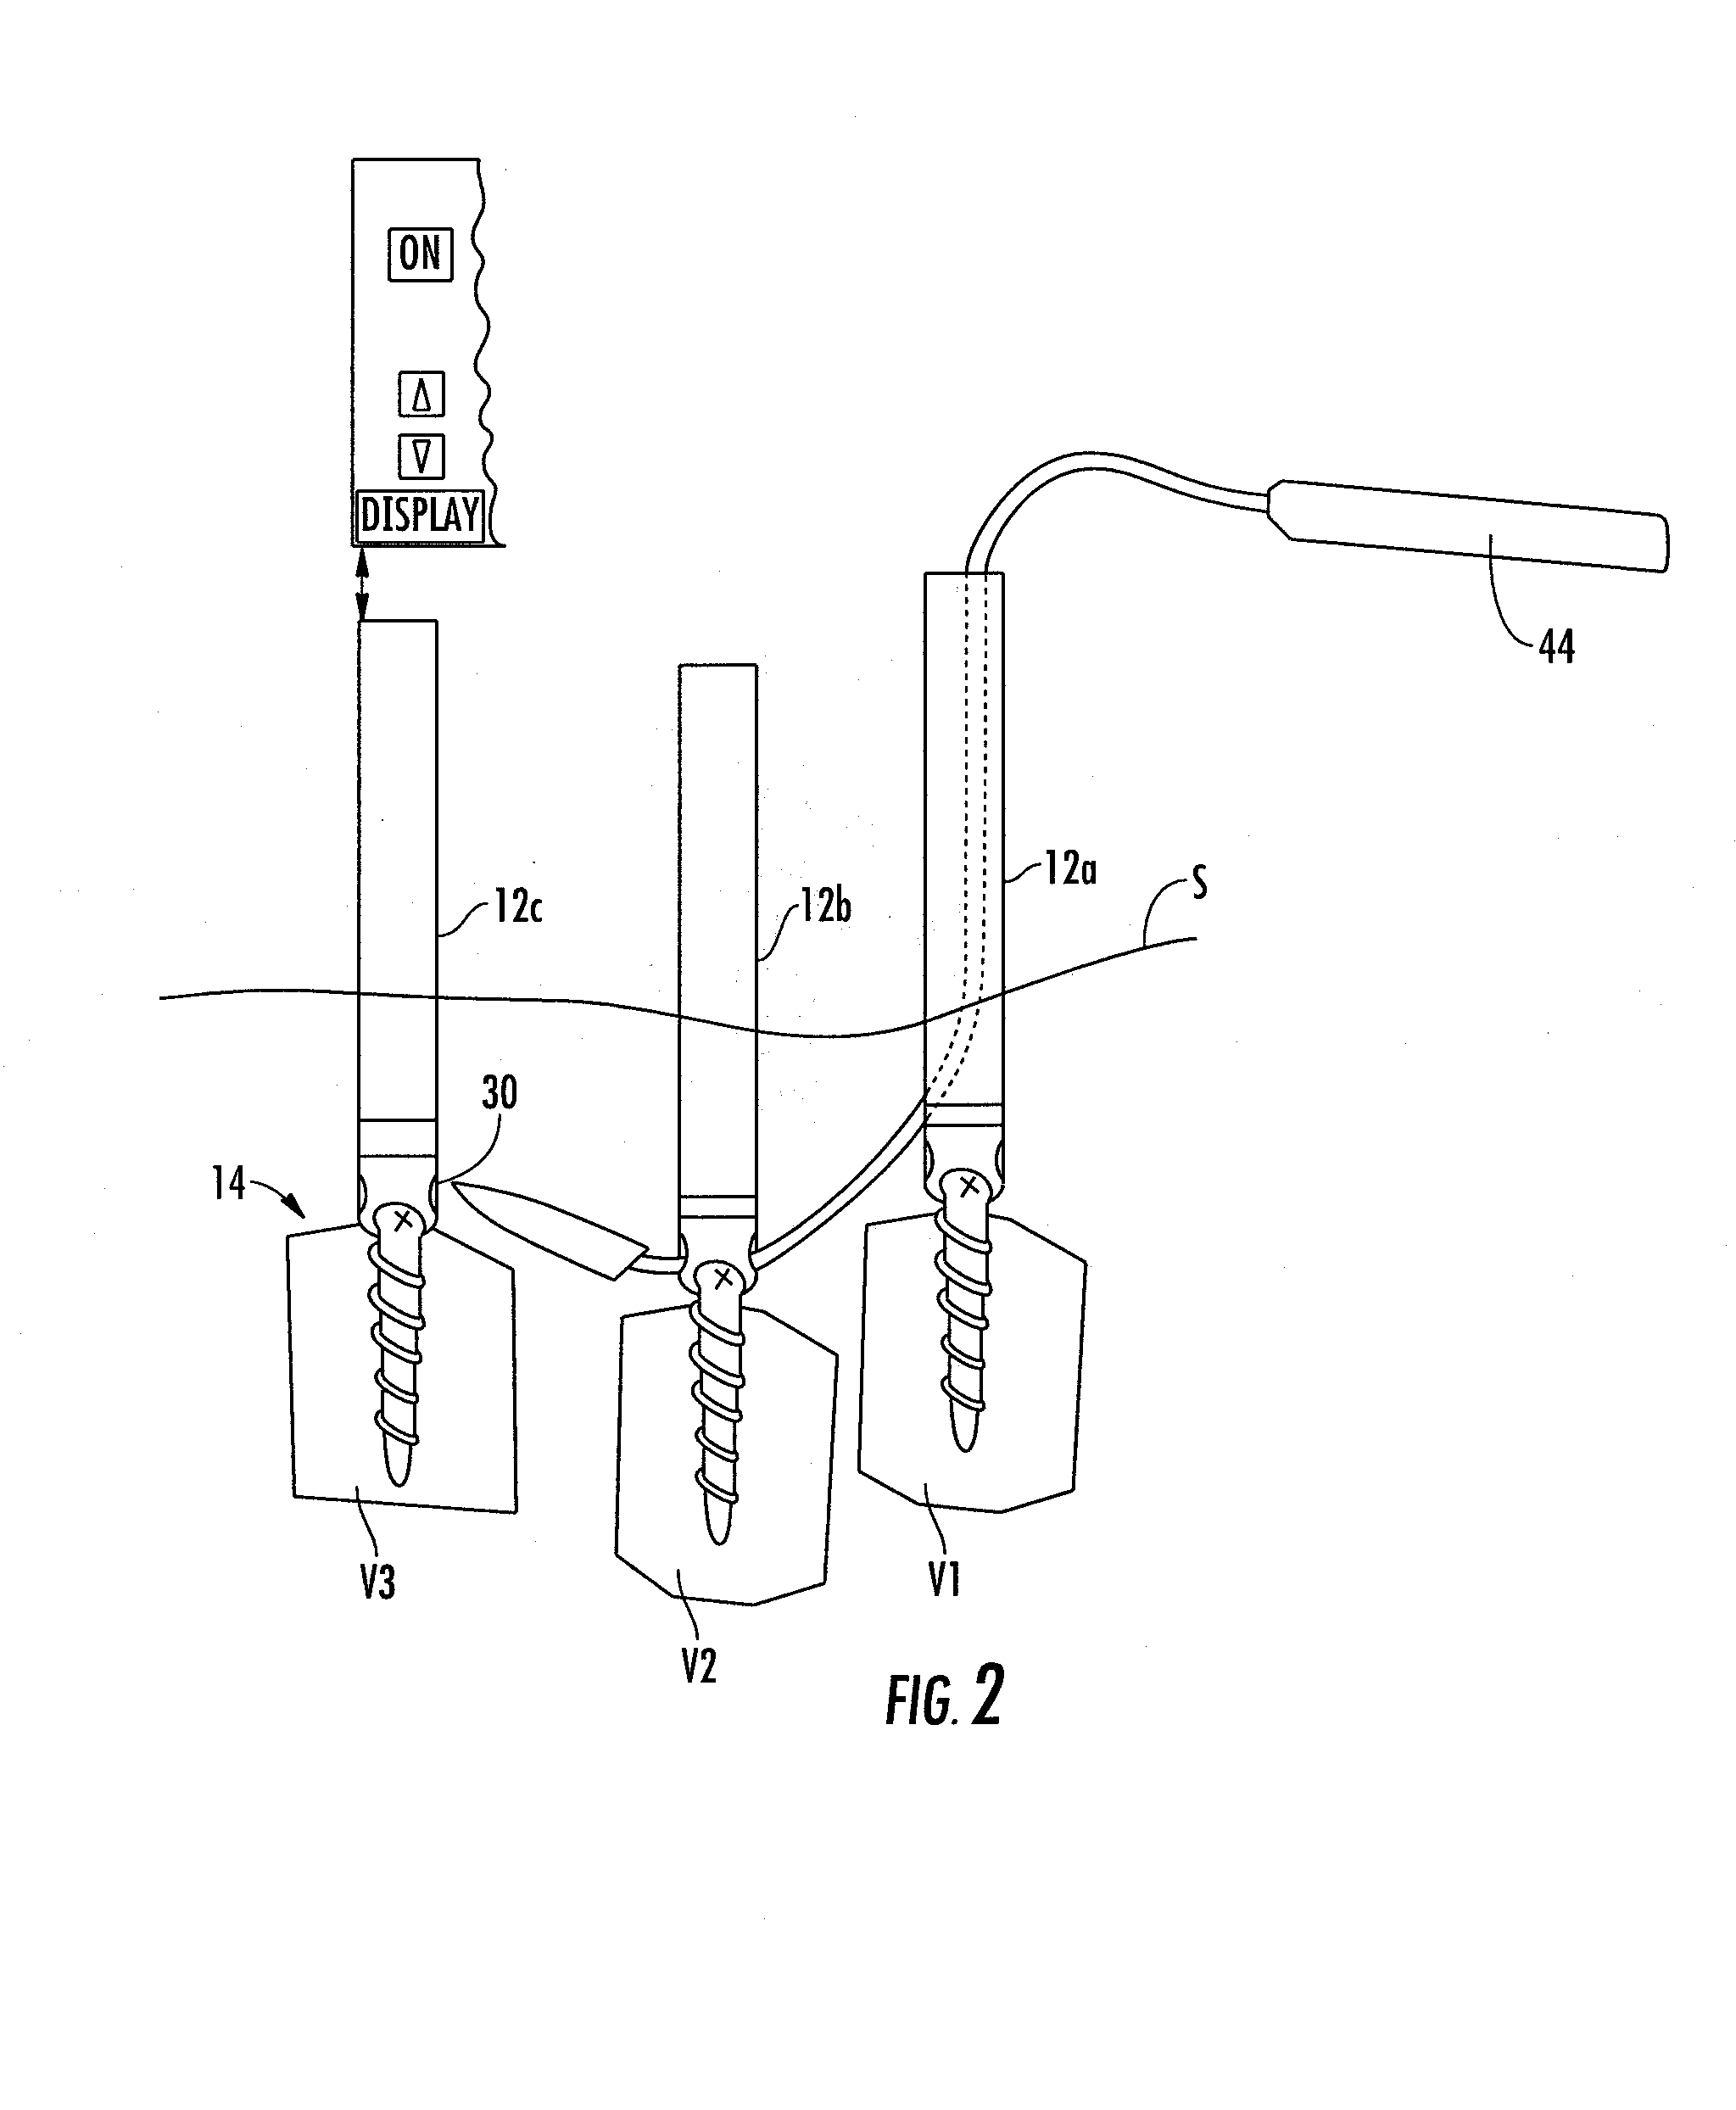 Method And Apparatus For Facilitating Navigation Of An Implant